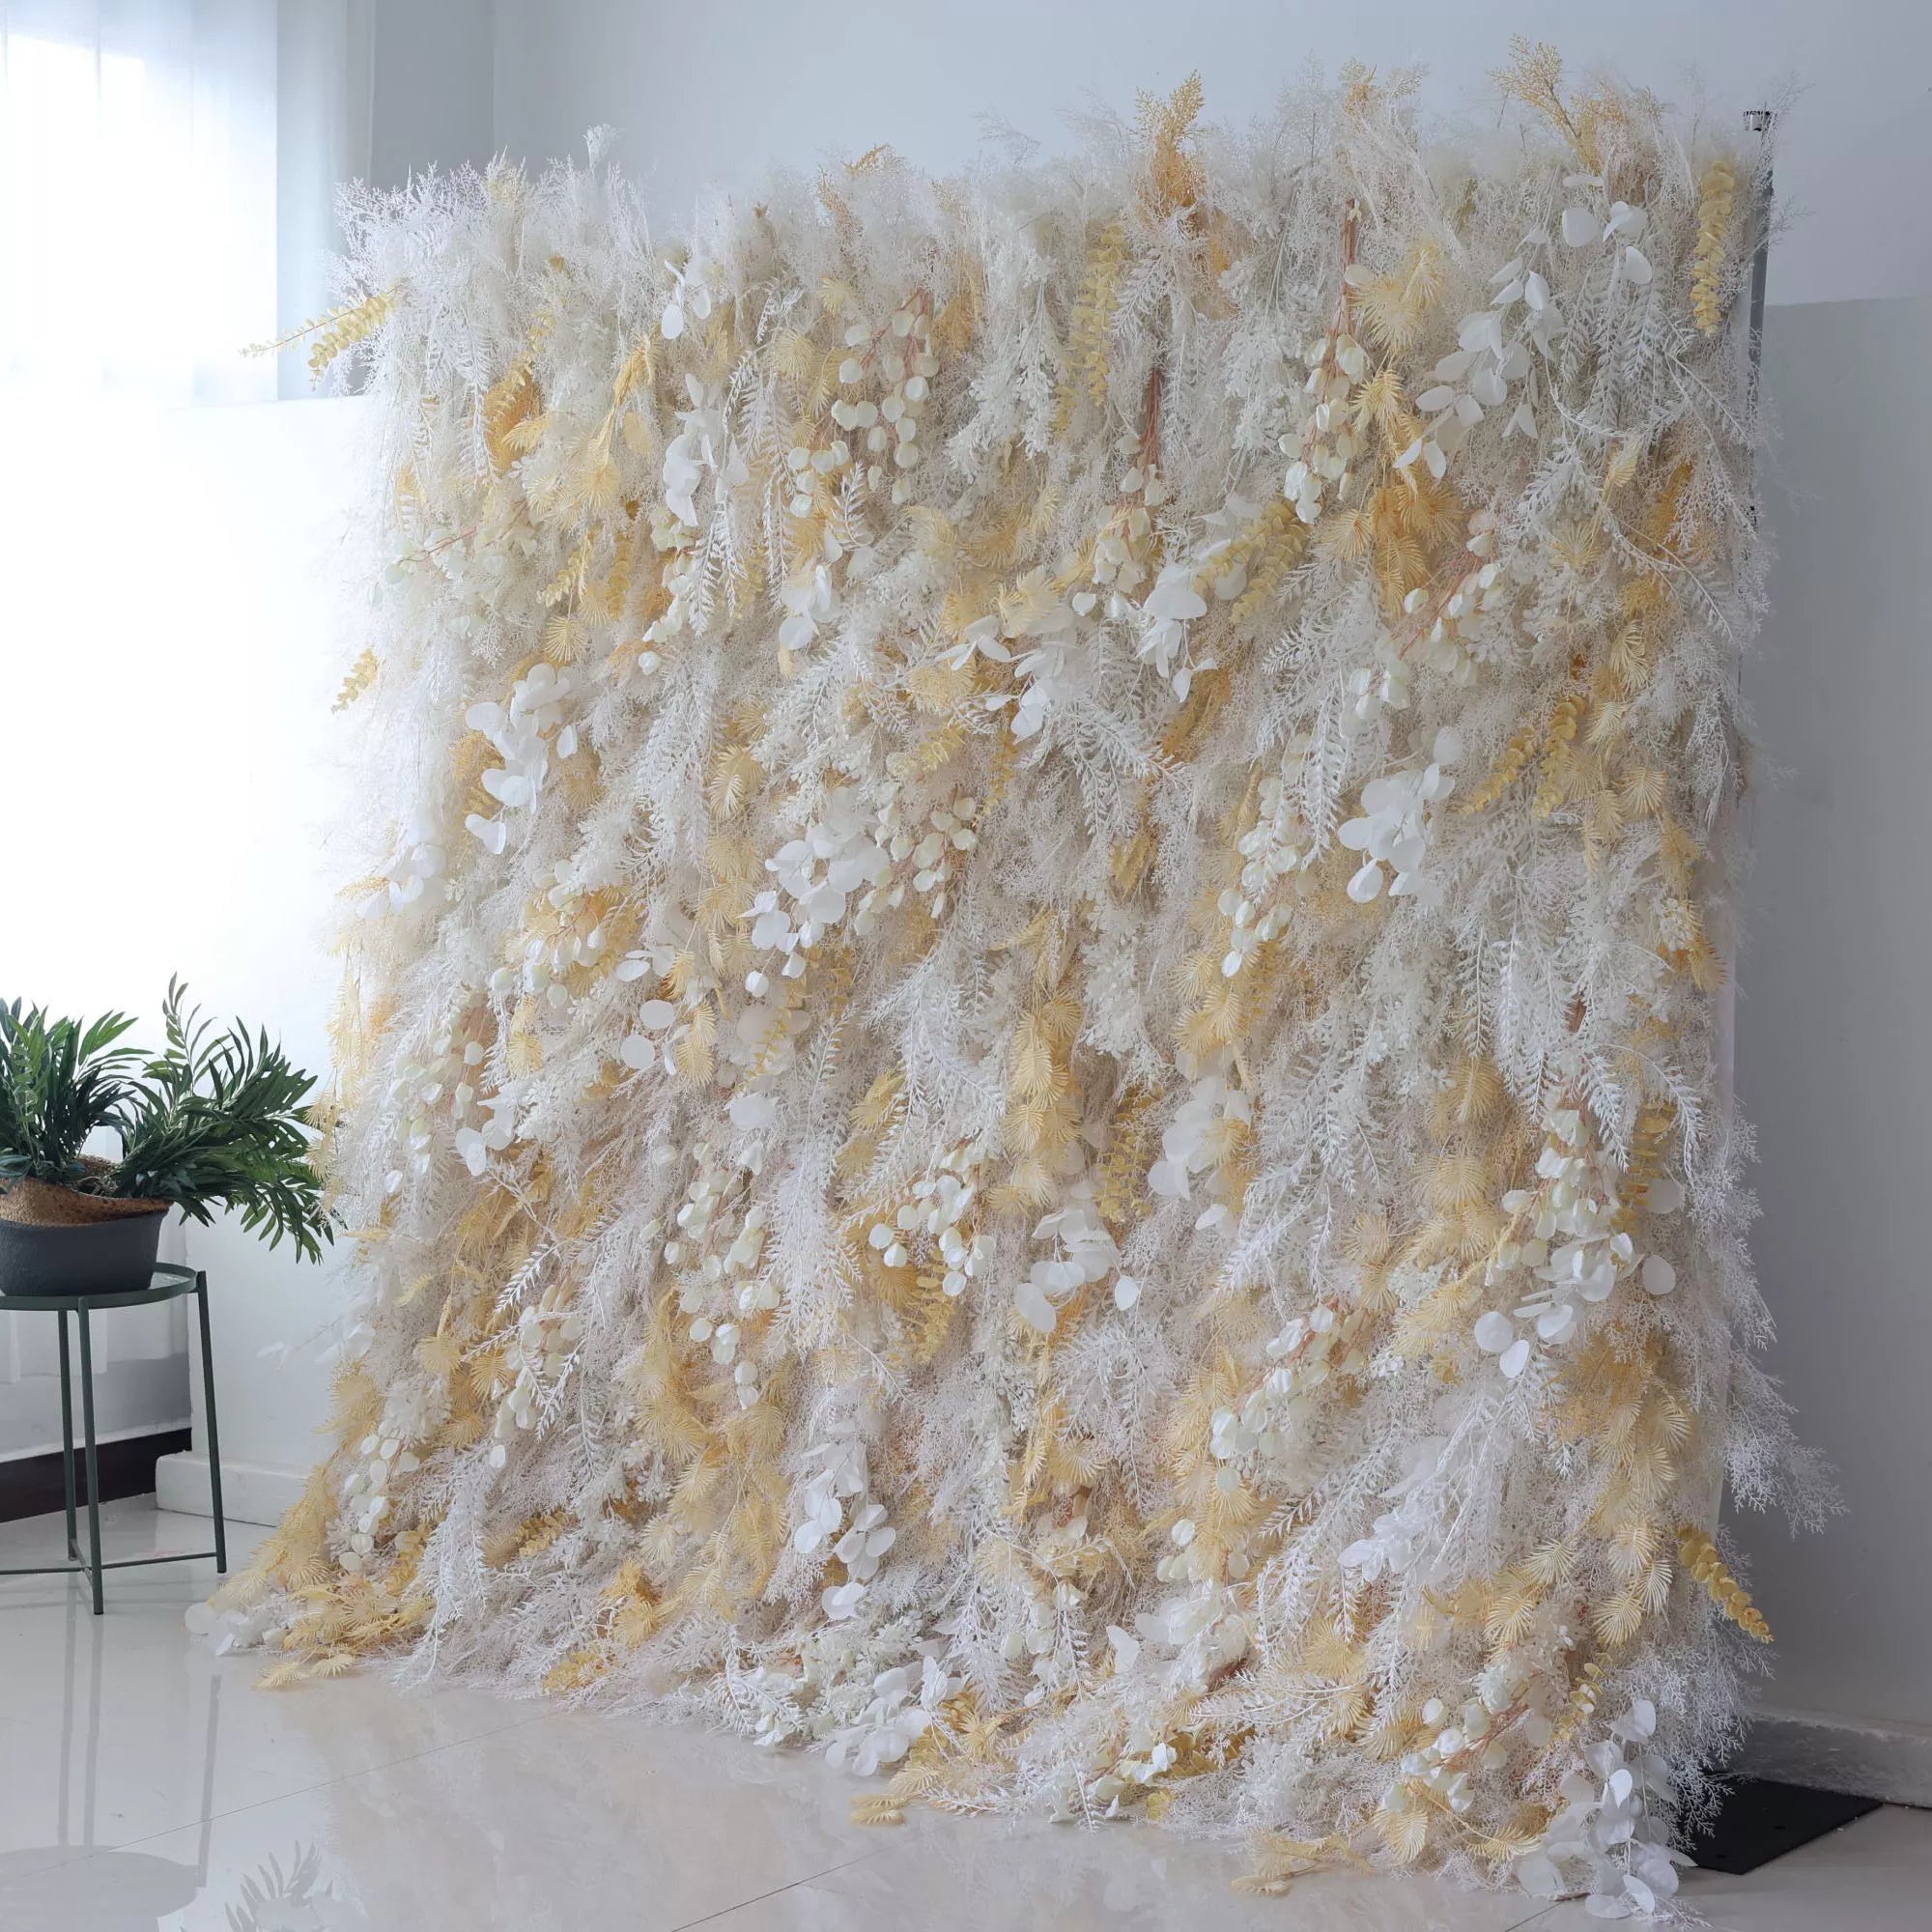 Introducing Valar Flowers' Artificial Fabric Flower Wall: Golden Gossamer Dreams. Soft white textures merge with shimmering gilded petals, creating a luminous display perfect for events radiating elegance and charm.